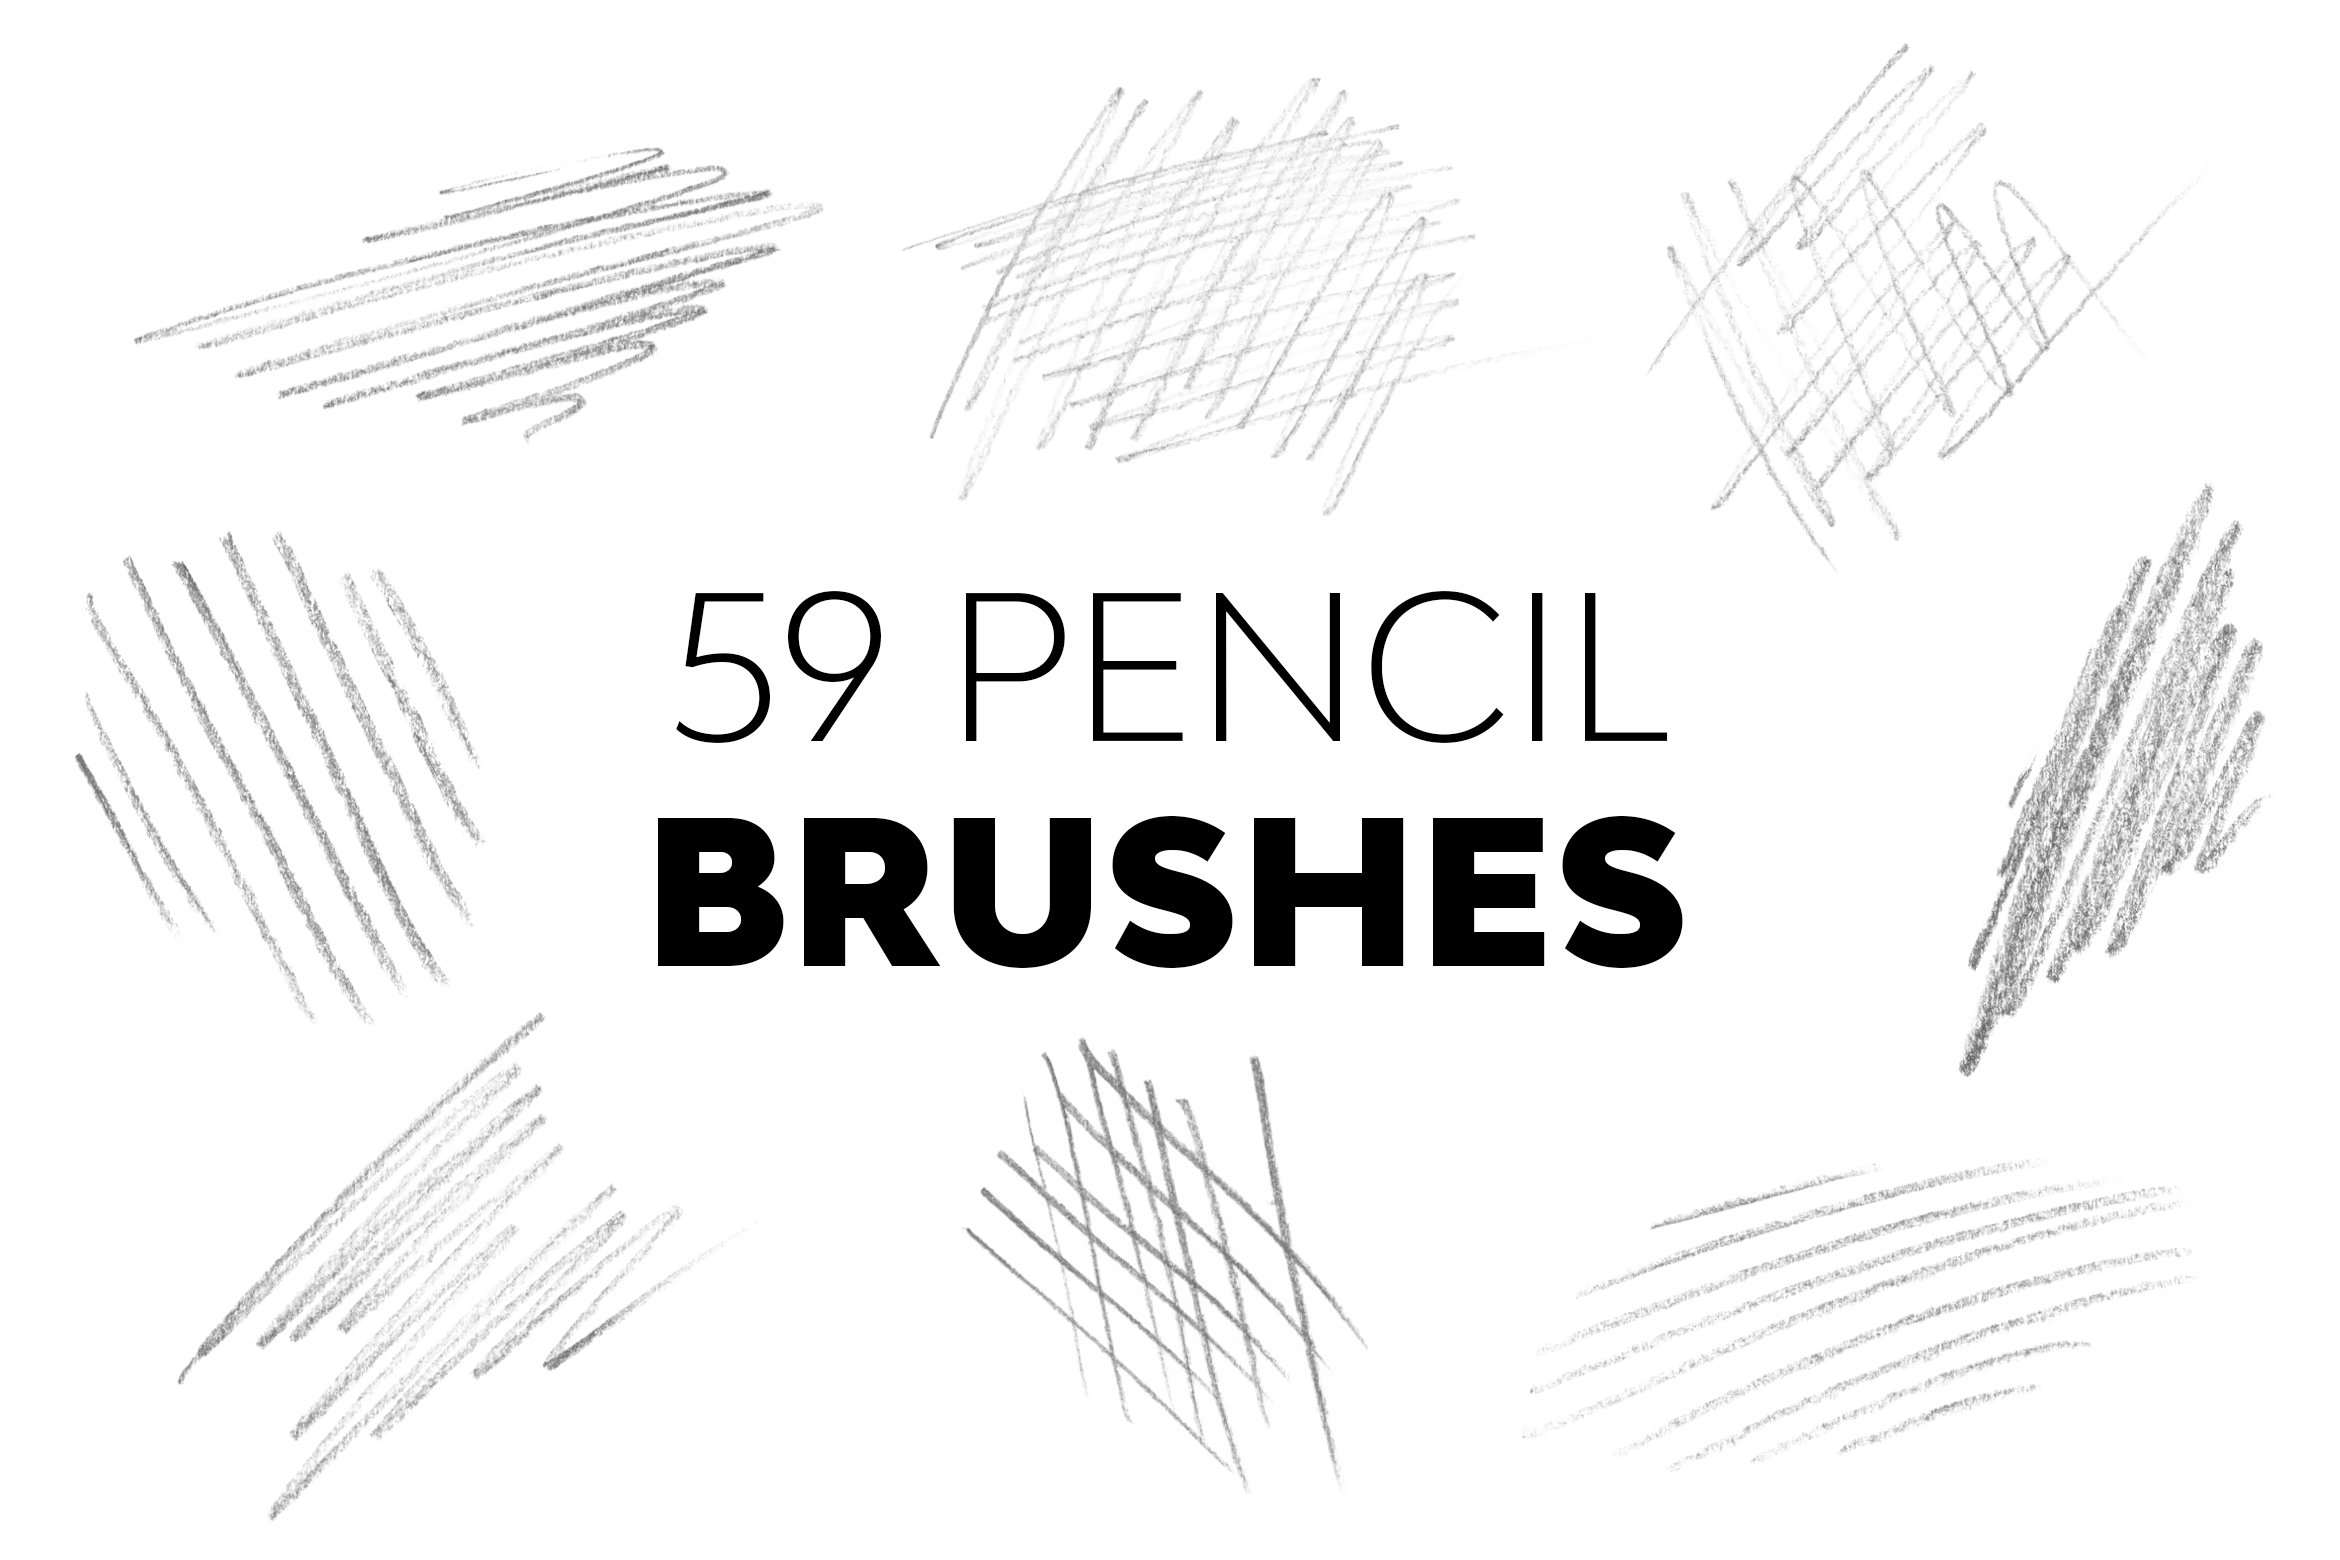 Pencil Brushes cover image.